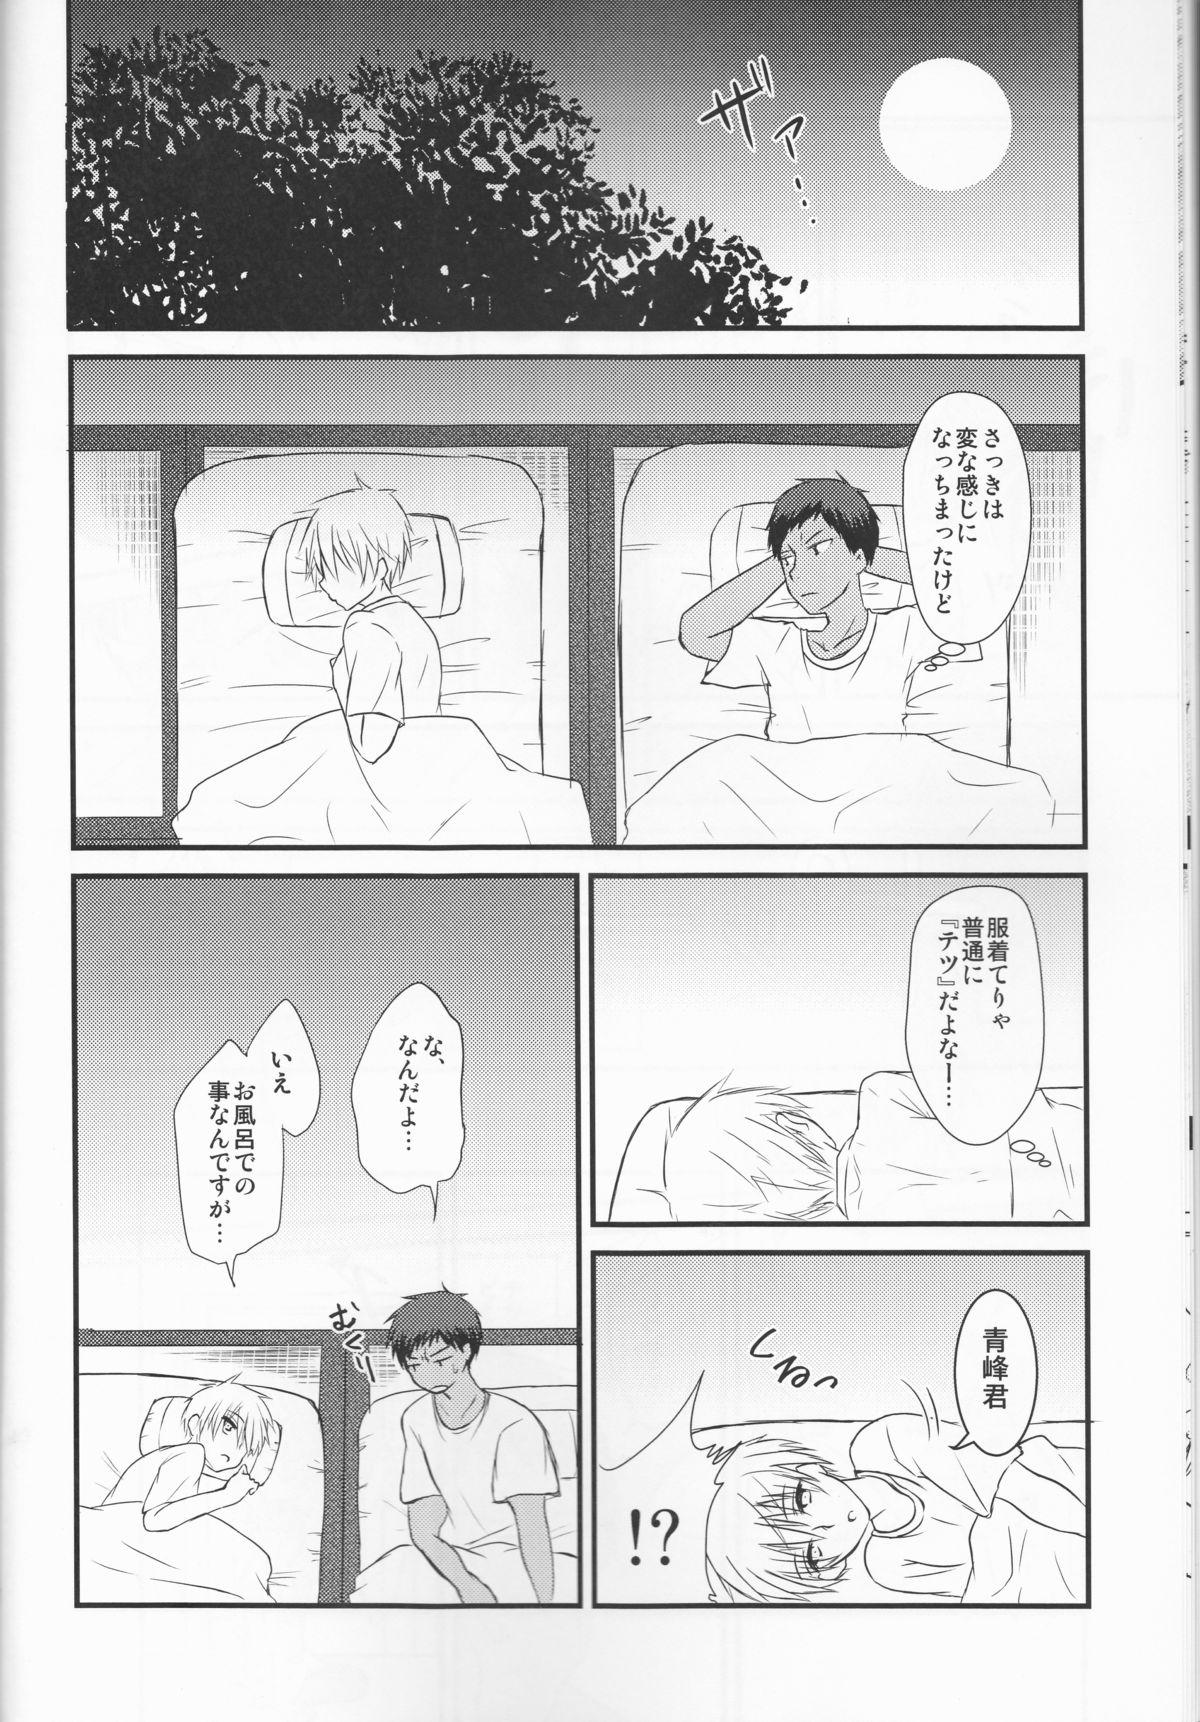 Penis Yesterday of his and her tomorrow - Kuroko no basuke Public Sex - Page 12